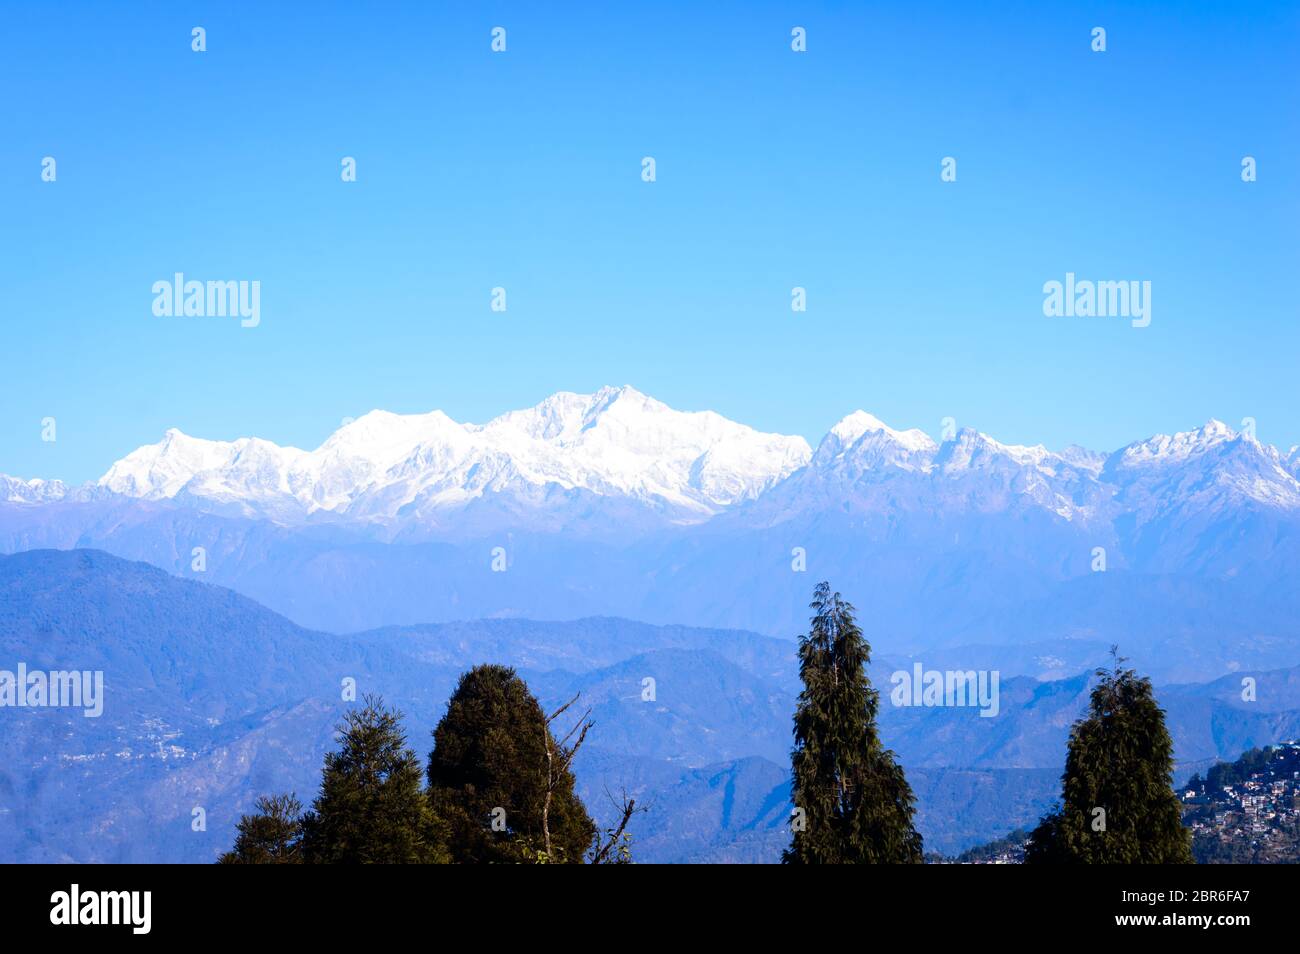 View of Himalaya, the Kanchenjunga mountain range, morning sunrise falling over the peak, from 'Dzongri' pass sikkim on a sunny day in clear bule sky. Stock Photo